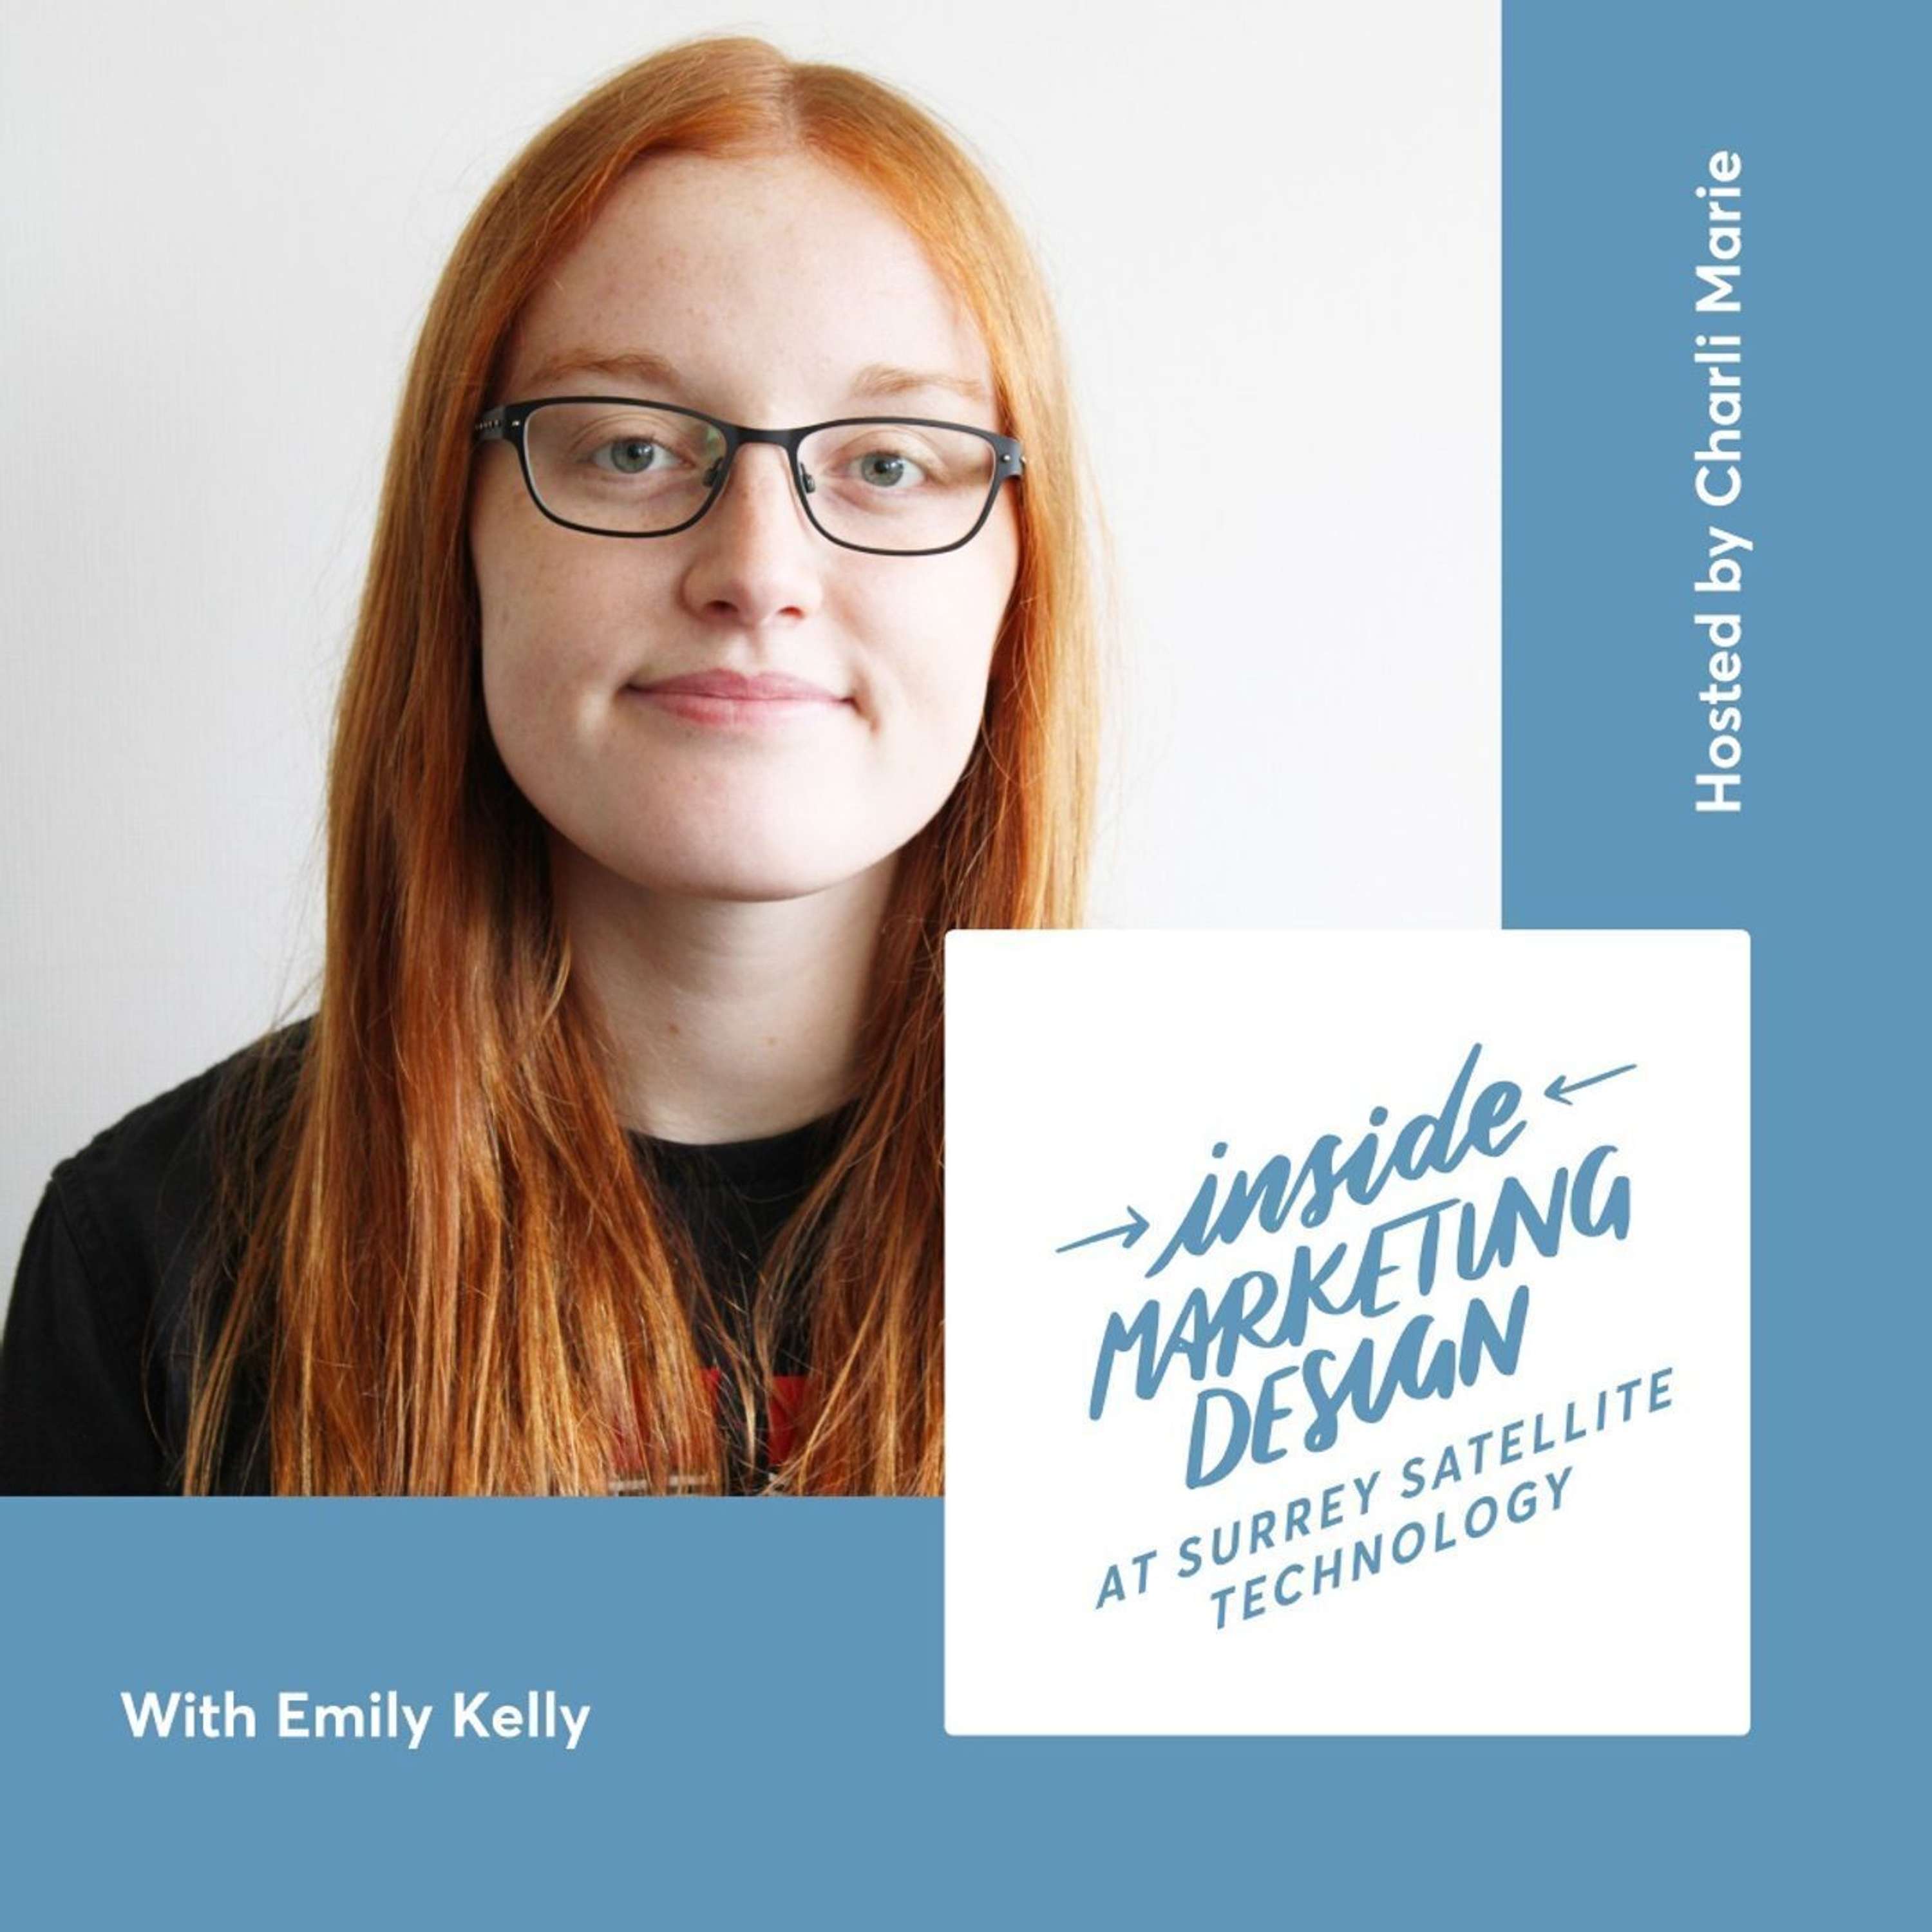 S01E05 - Inside Marketing Design at Surrey satellite Technology (with Emily Kelly)